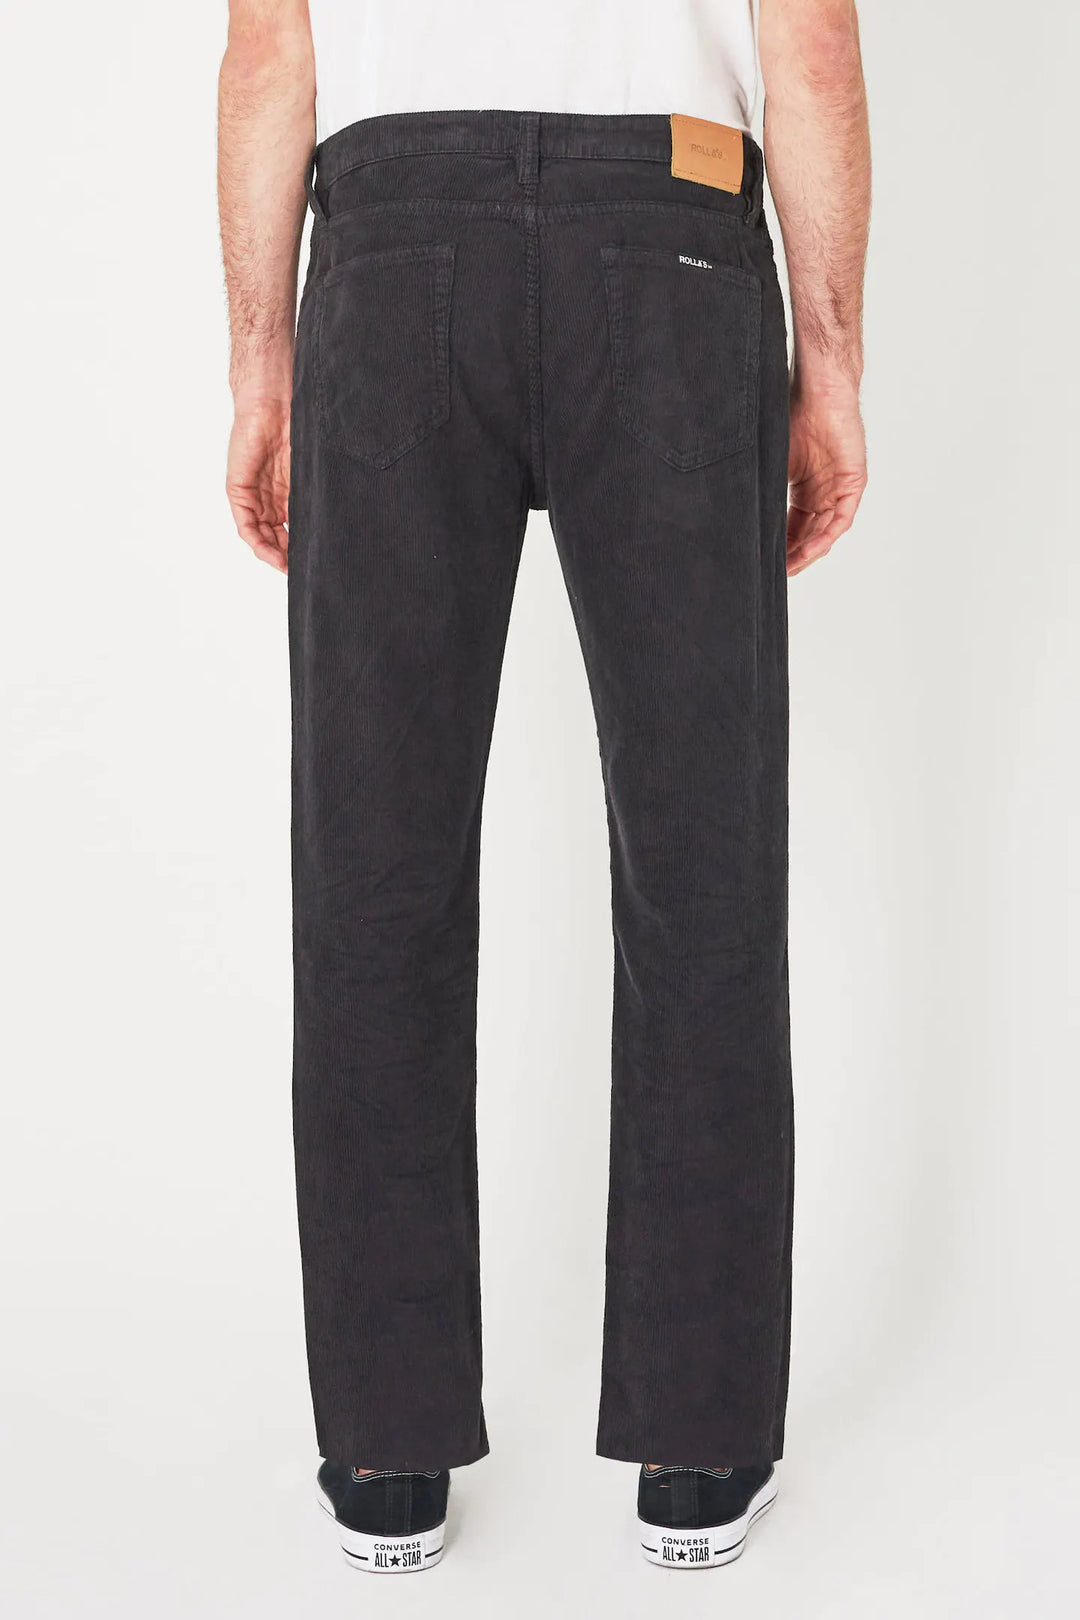 Rolla's Relaxo Rollas Black Cord Pant - Black Cord